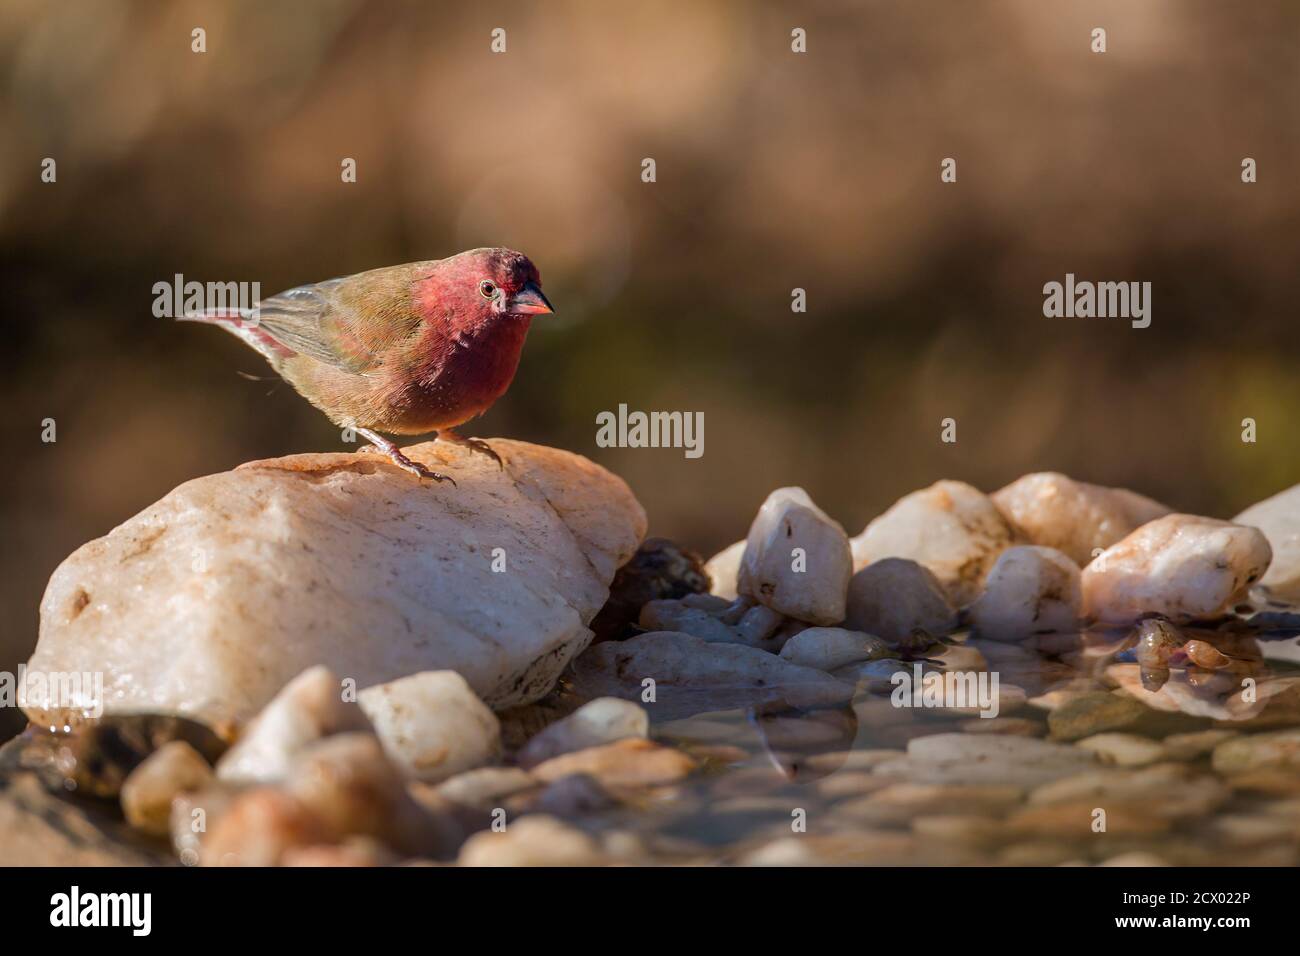 Red-billed Firefinch male standing at waterhole in Kruger National park, South Africa ; Specie family Lagonosticta senegala of Estrildidae Stock Photo